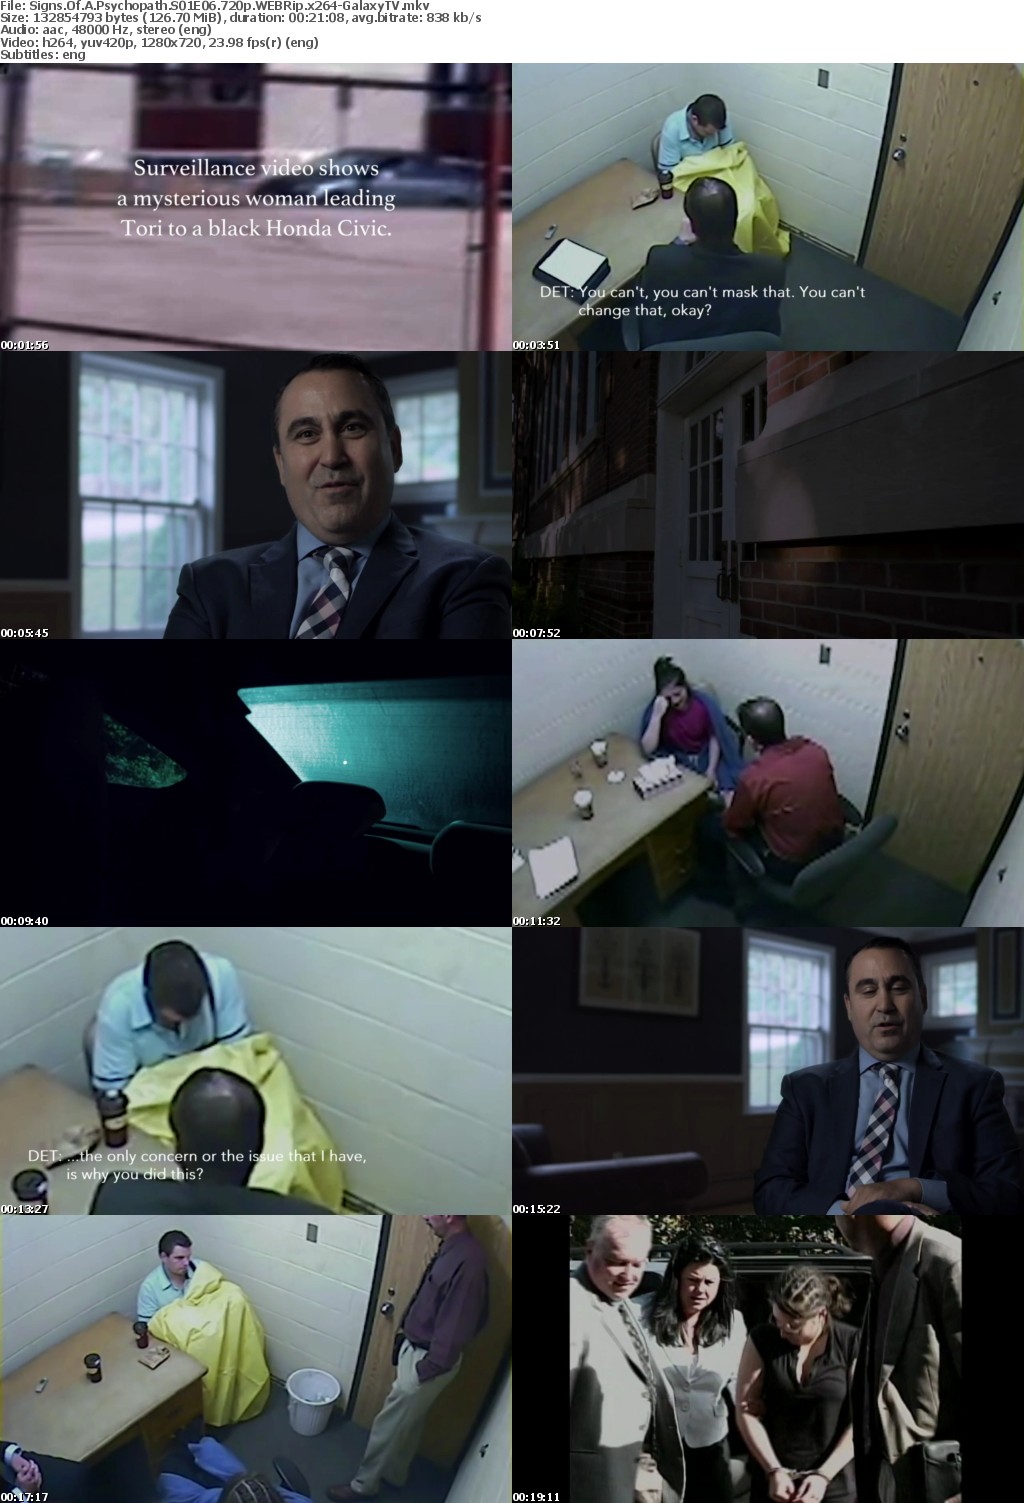 Signs of a Psychopath S01 COMPLETE 720p WEBRip x264-GalaxyTV